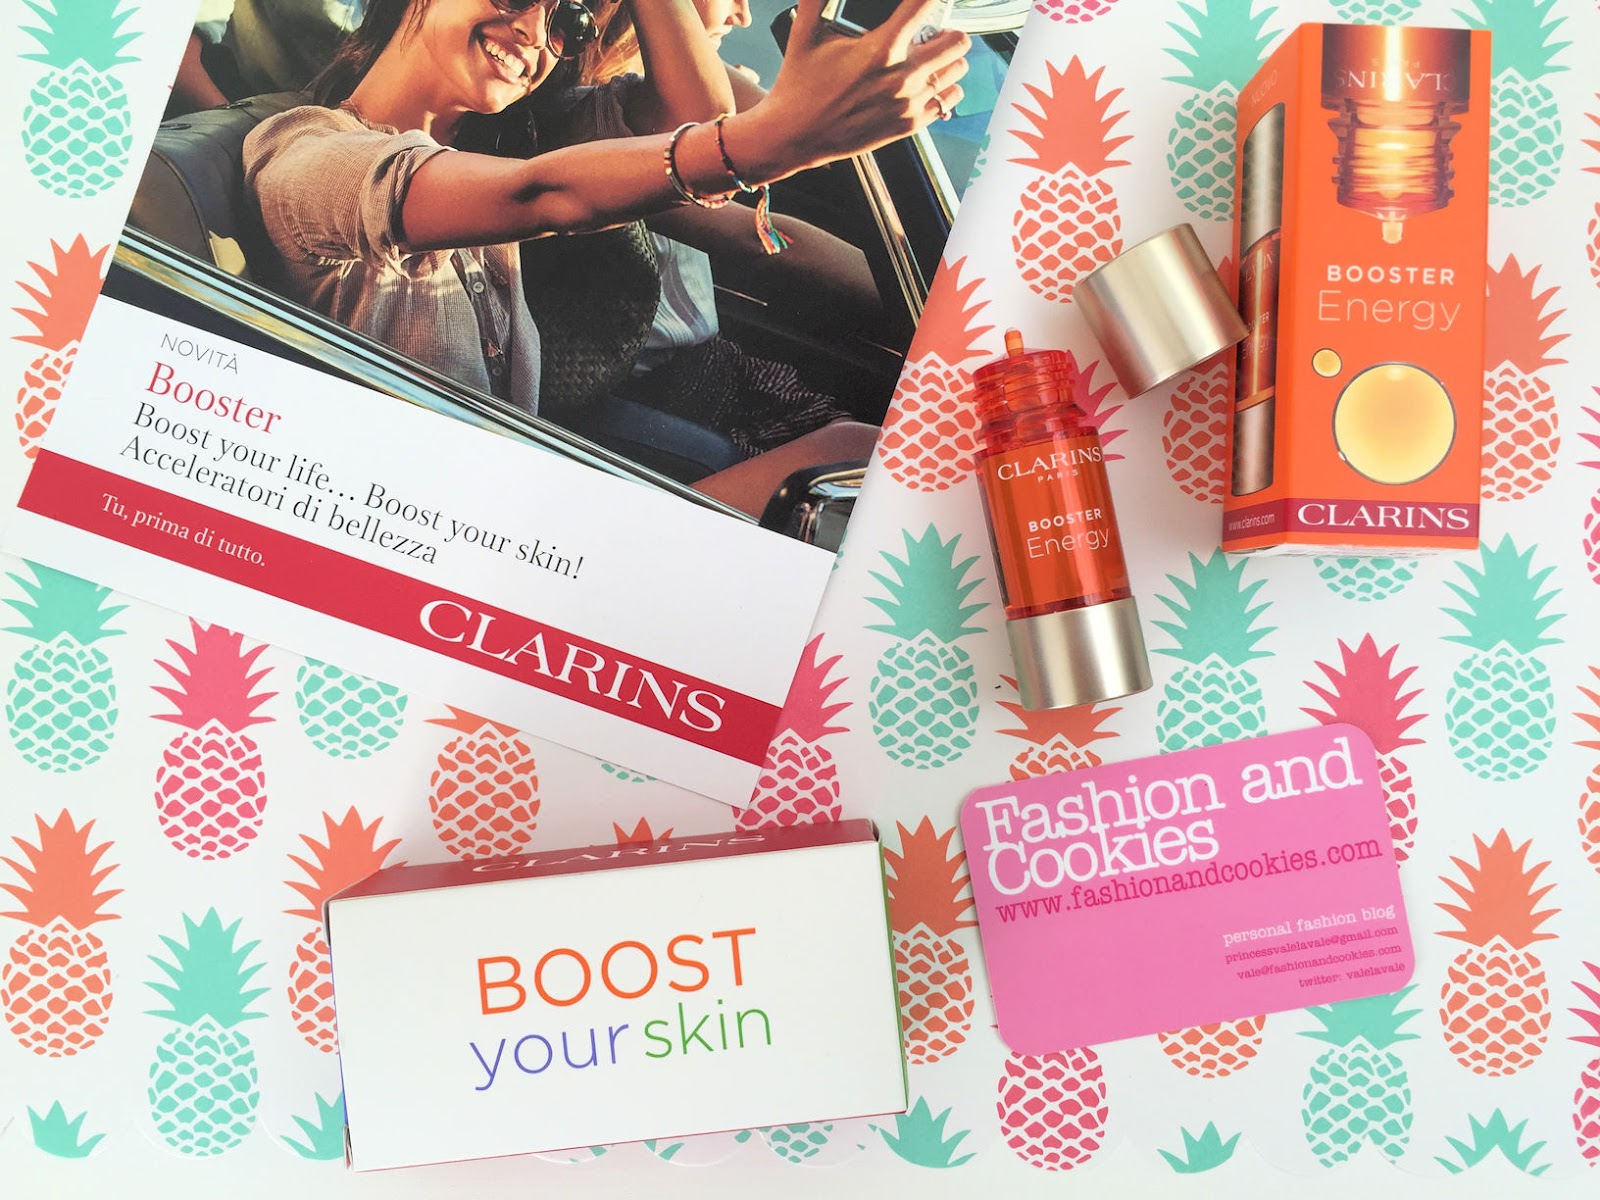 Clarins Booster Energy review on Fashion and Cookies beauty blog, beauty blogger